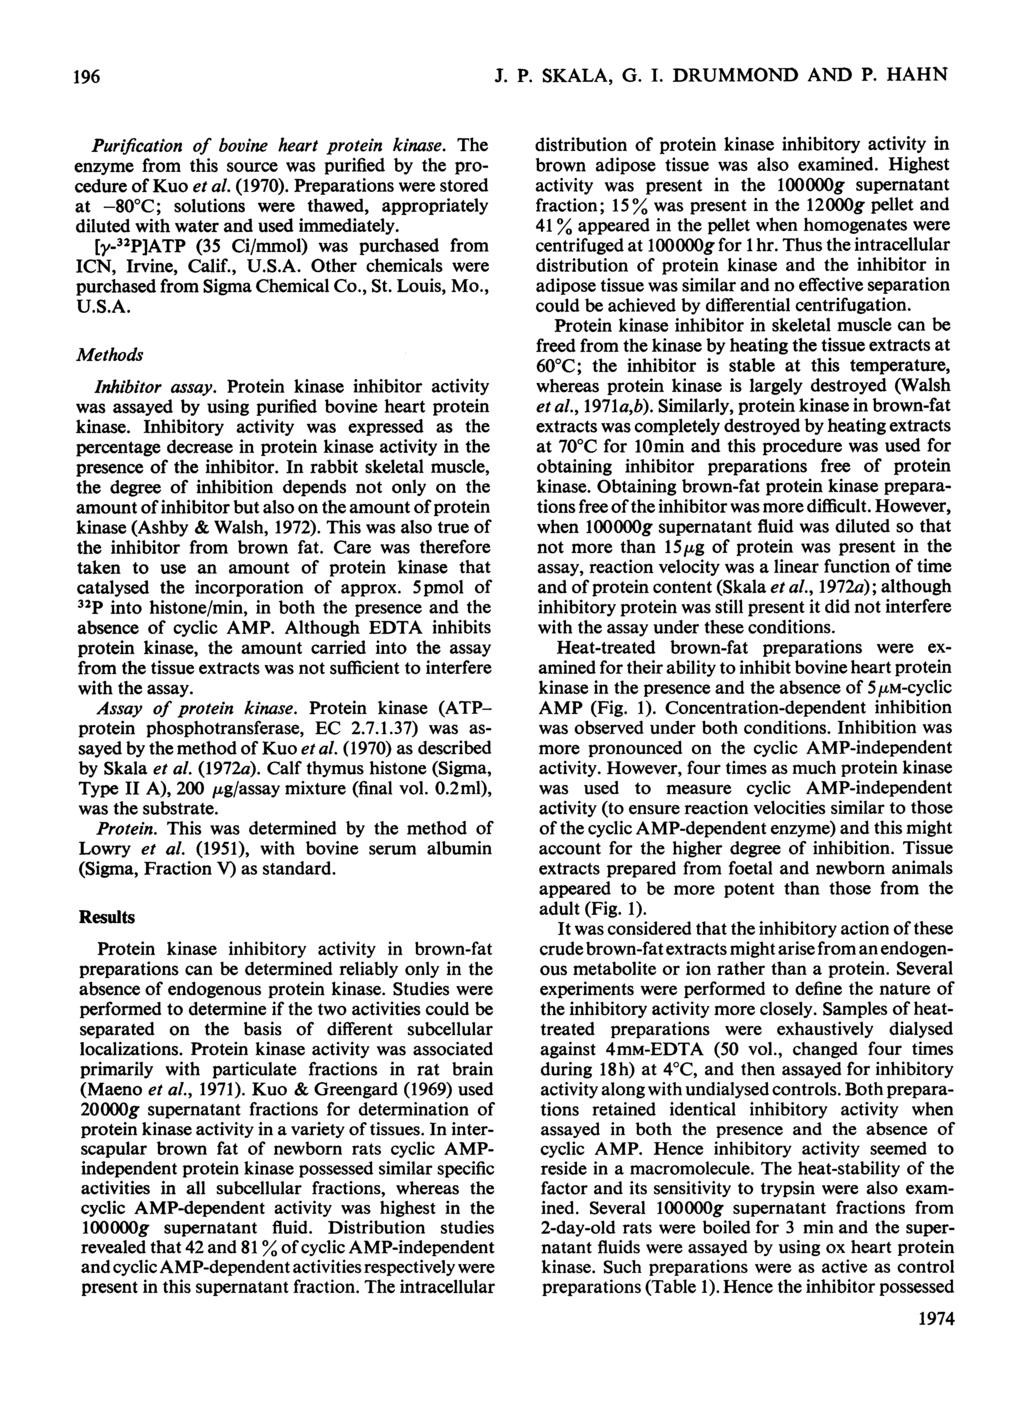 196 J. P. SKALA, G. I. DRUMMOND AND P. HAHN Purification of bovine heart protein kinase. The enzyme from this source was purified by the procedure of Kuo et al. (197).